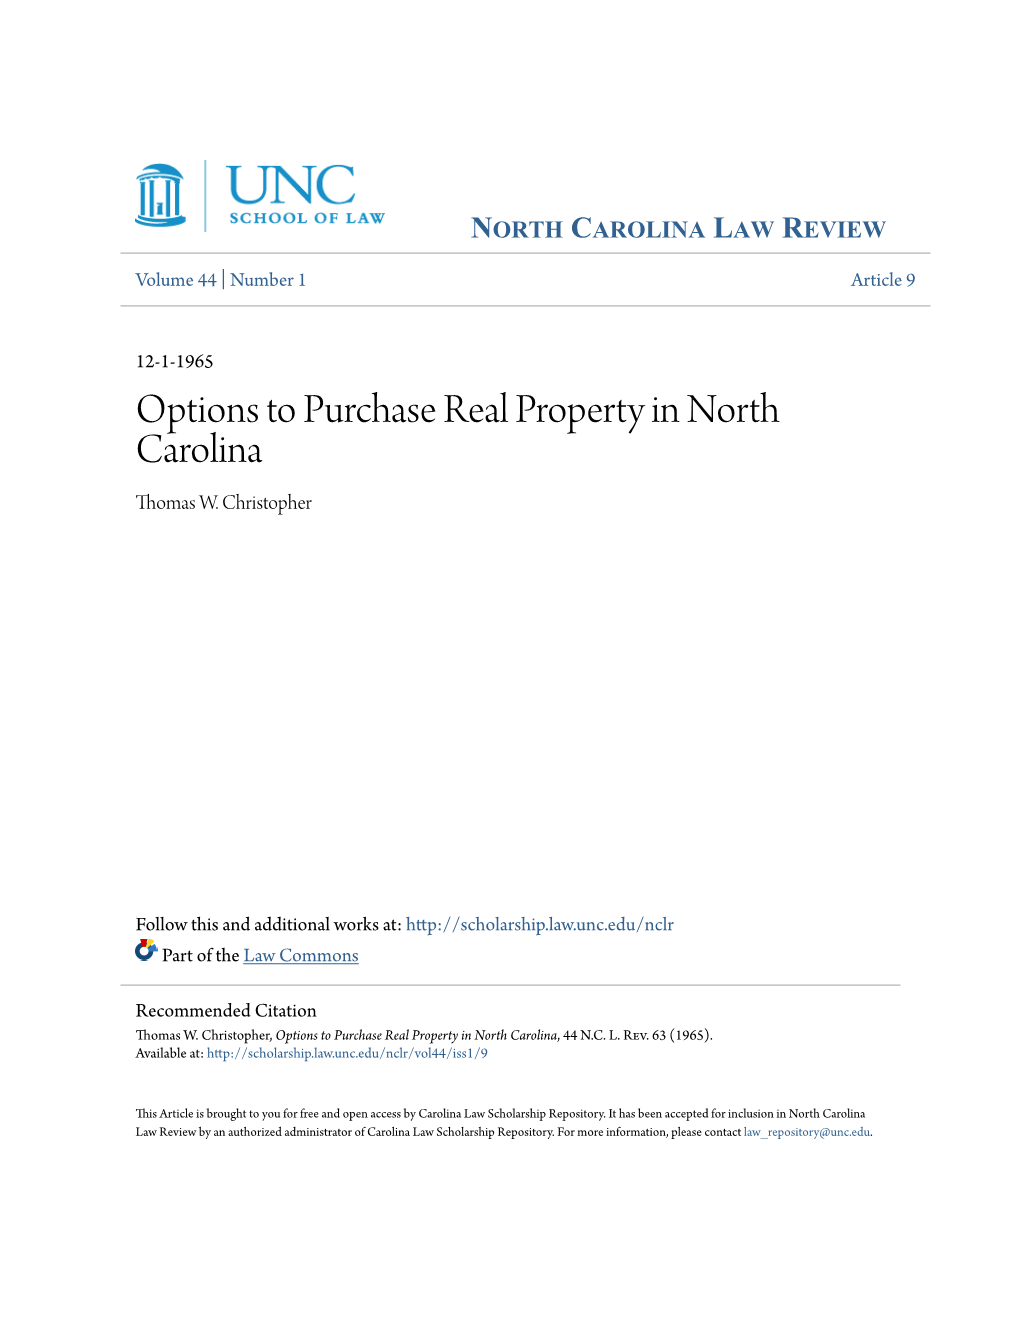 Options to Purchase Real Property in North Carolina Thomas W